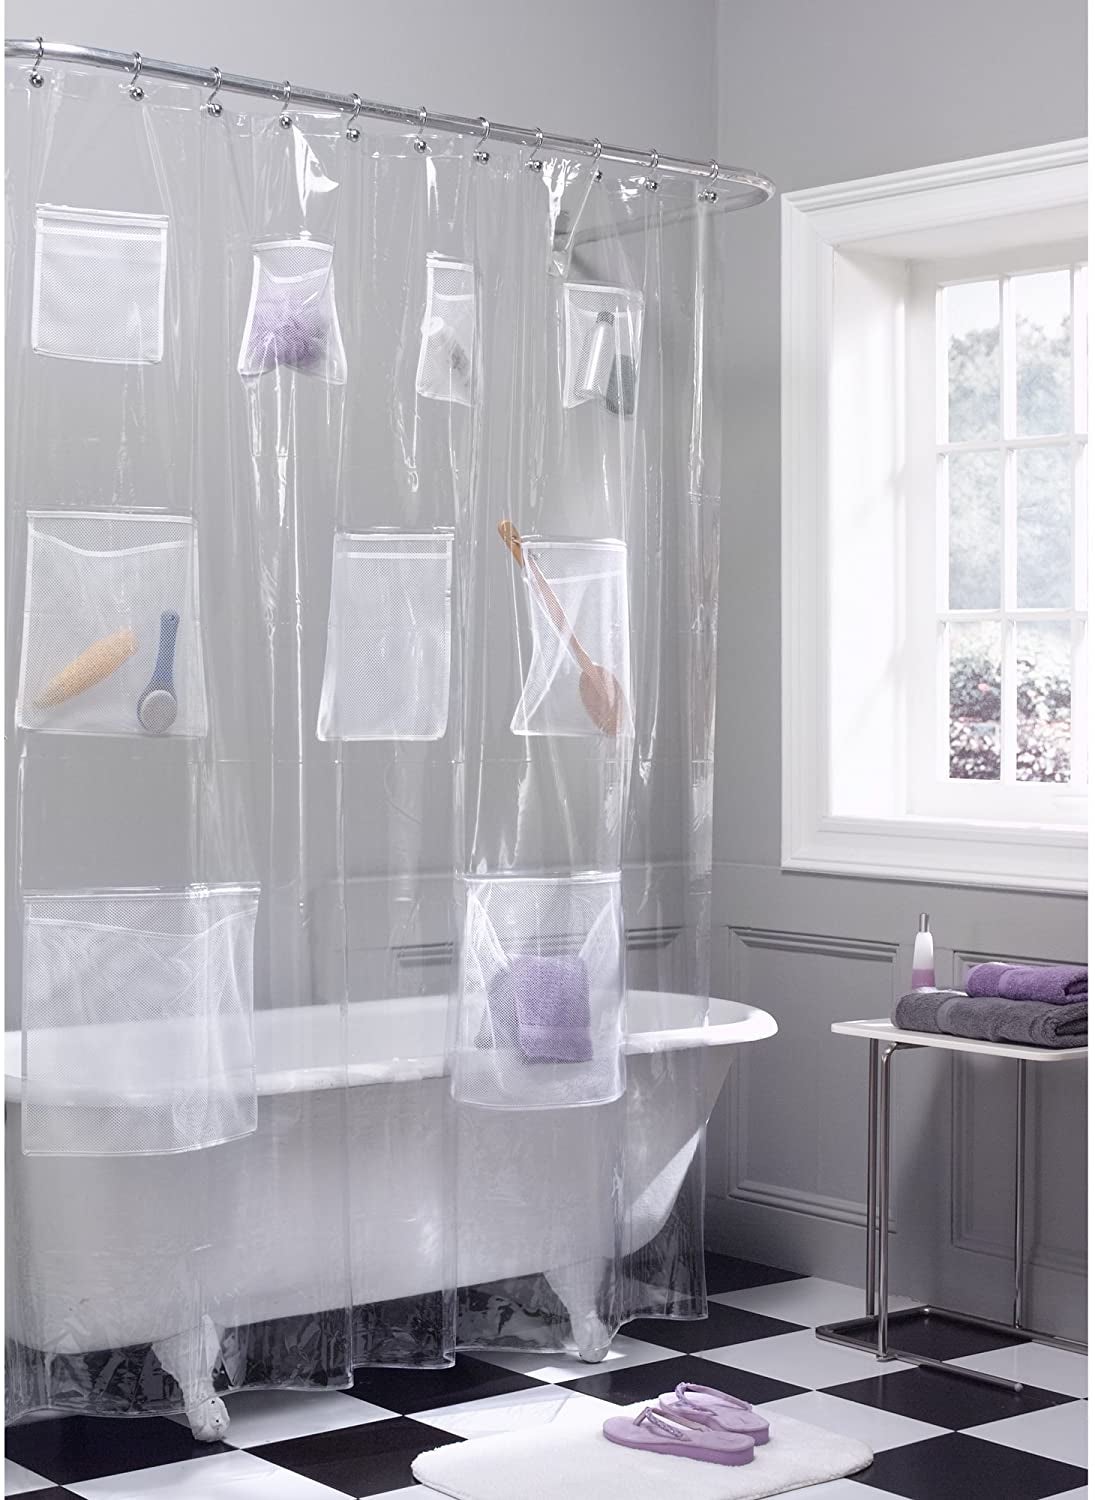 transparent shower curtain with bunch of pockets holding bottles and body brushes